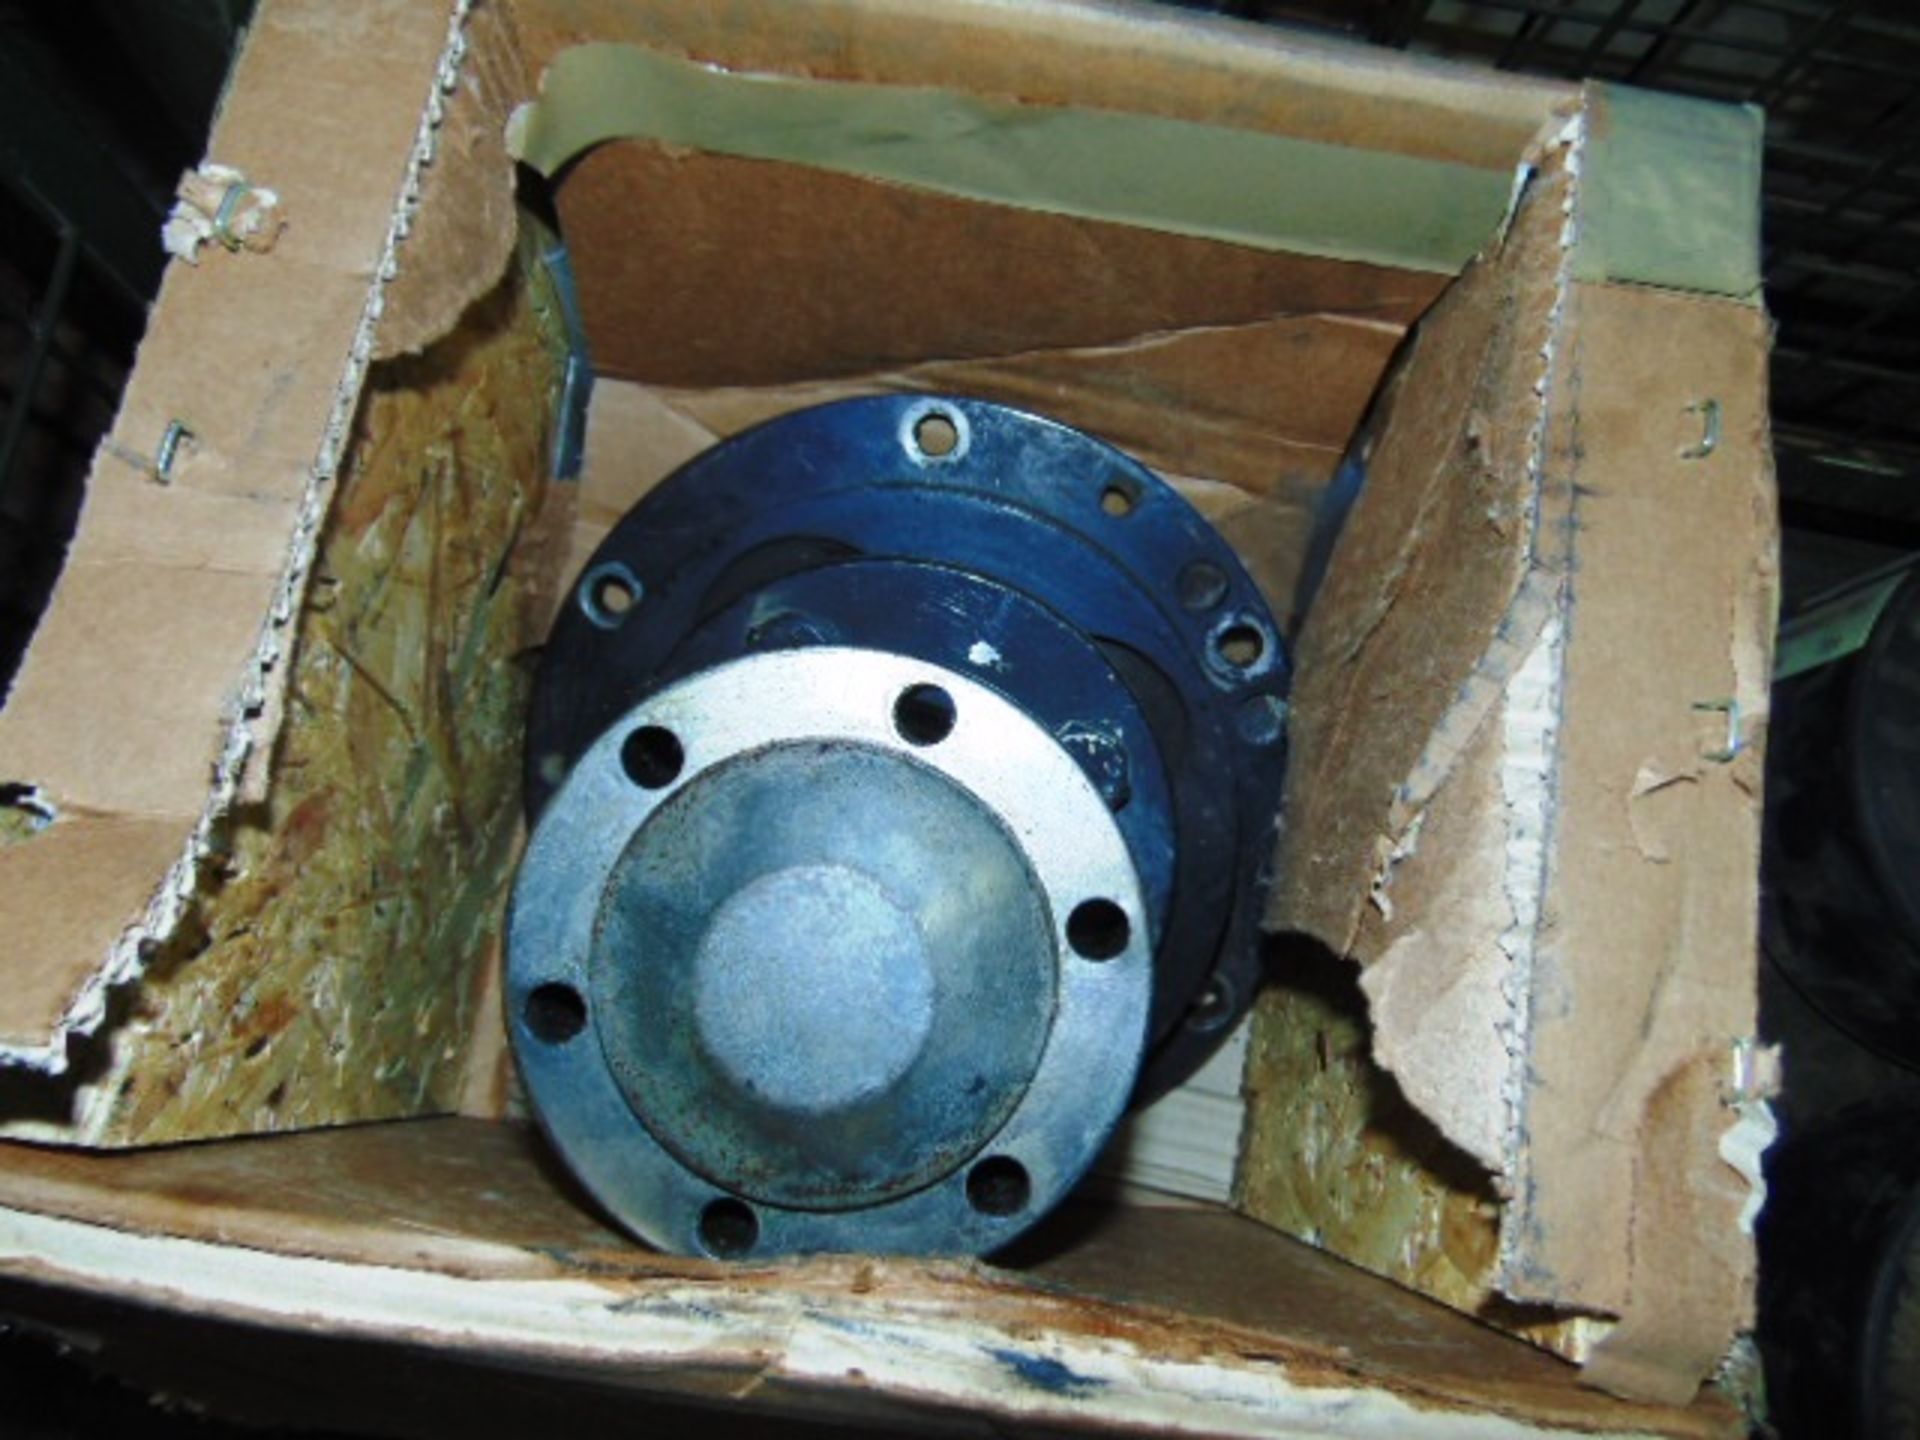 Mixed Stillage of CVRT, Warrior and FV Parts consisting of Wheels, Pumps, Shock Absorbers etc - Bild 5 aus 7